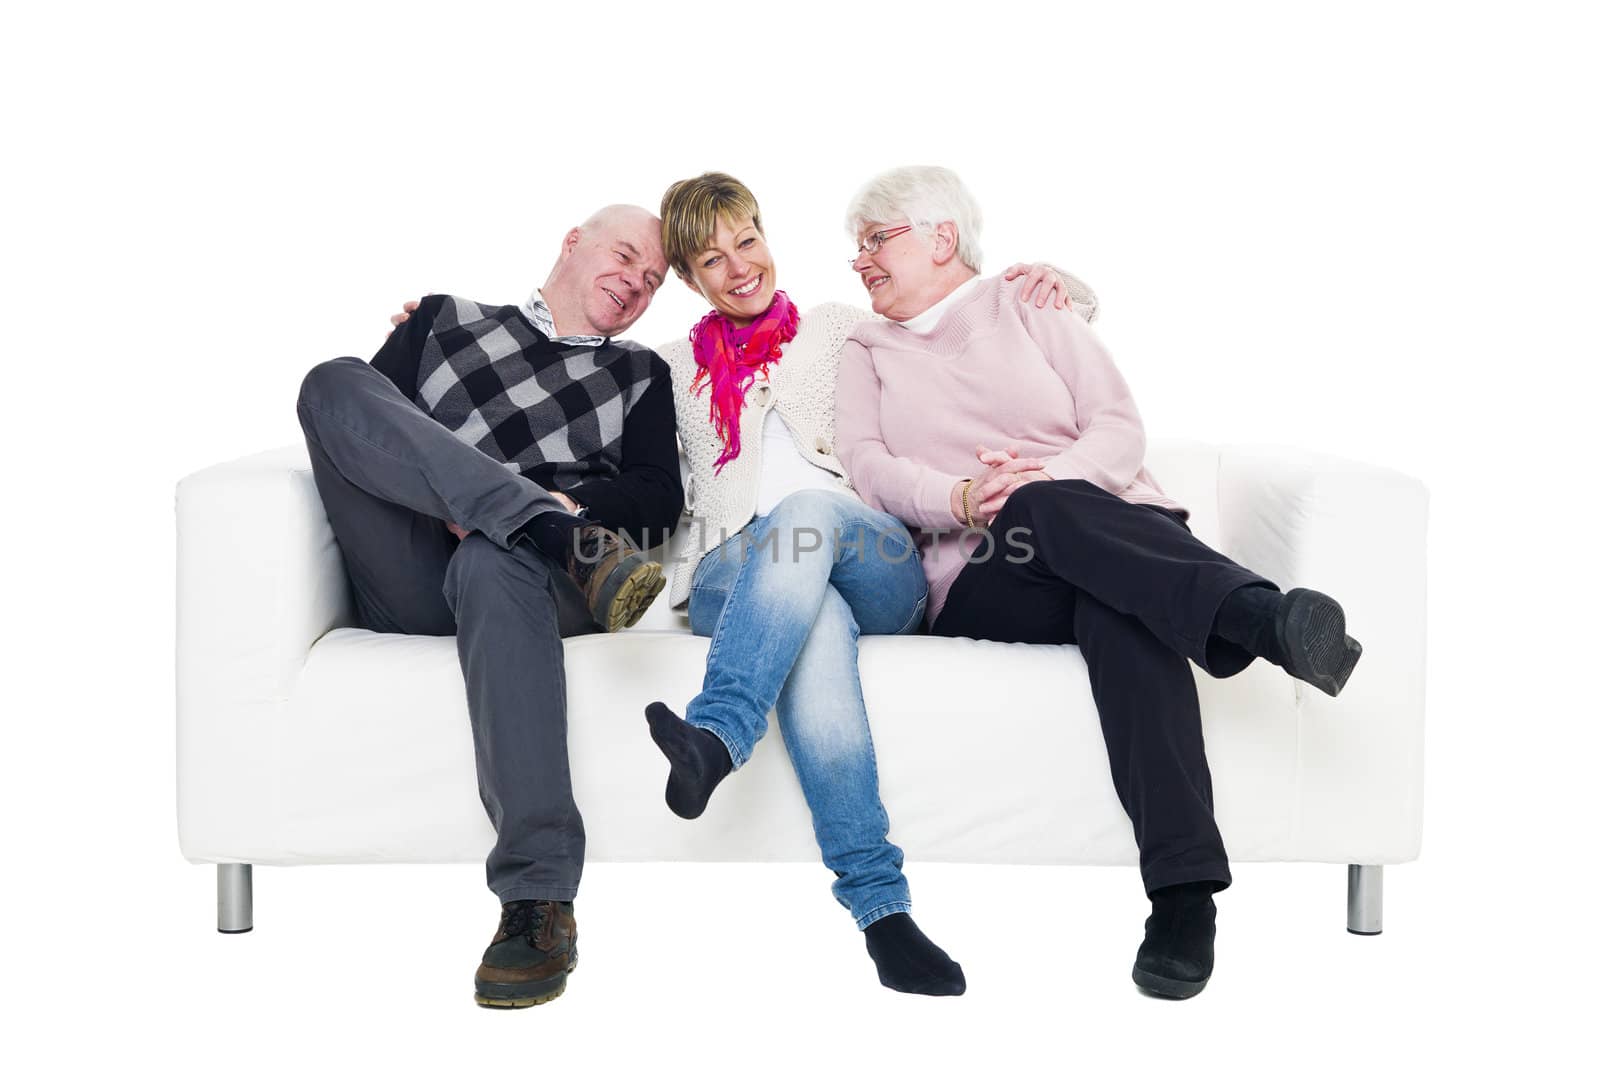 Woman with her parents in a sofa isolated on white background